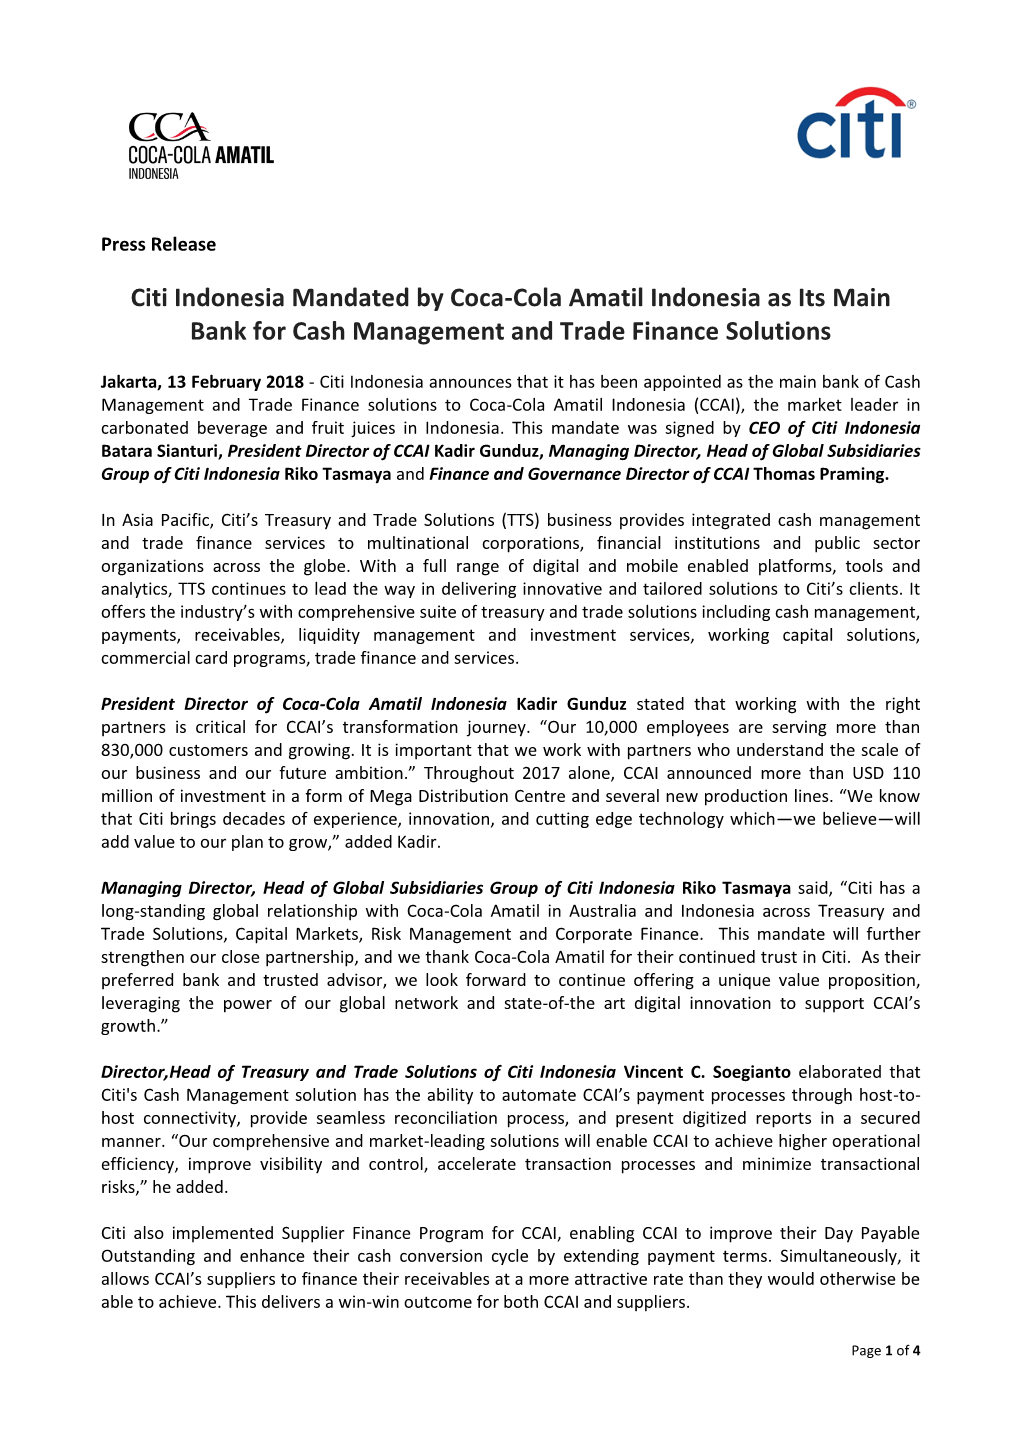 Citi Indonesia Mandated by Coca-Cola Amatil Indonesia As Its Main Bank for Cash Management and Trade Finance Solutions